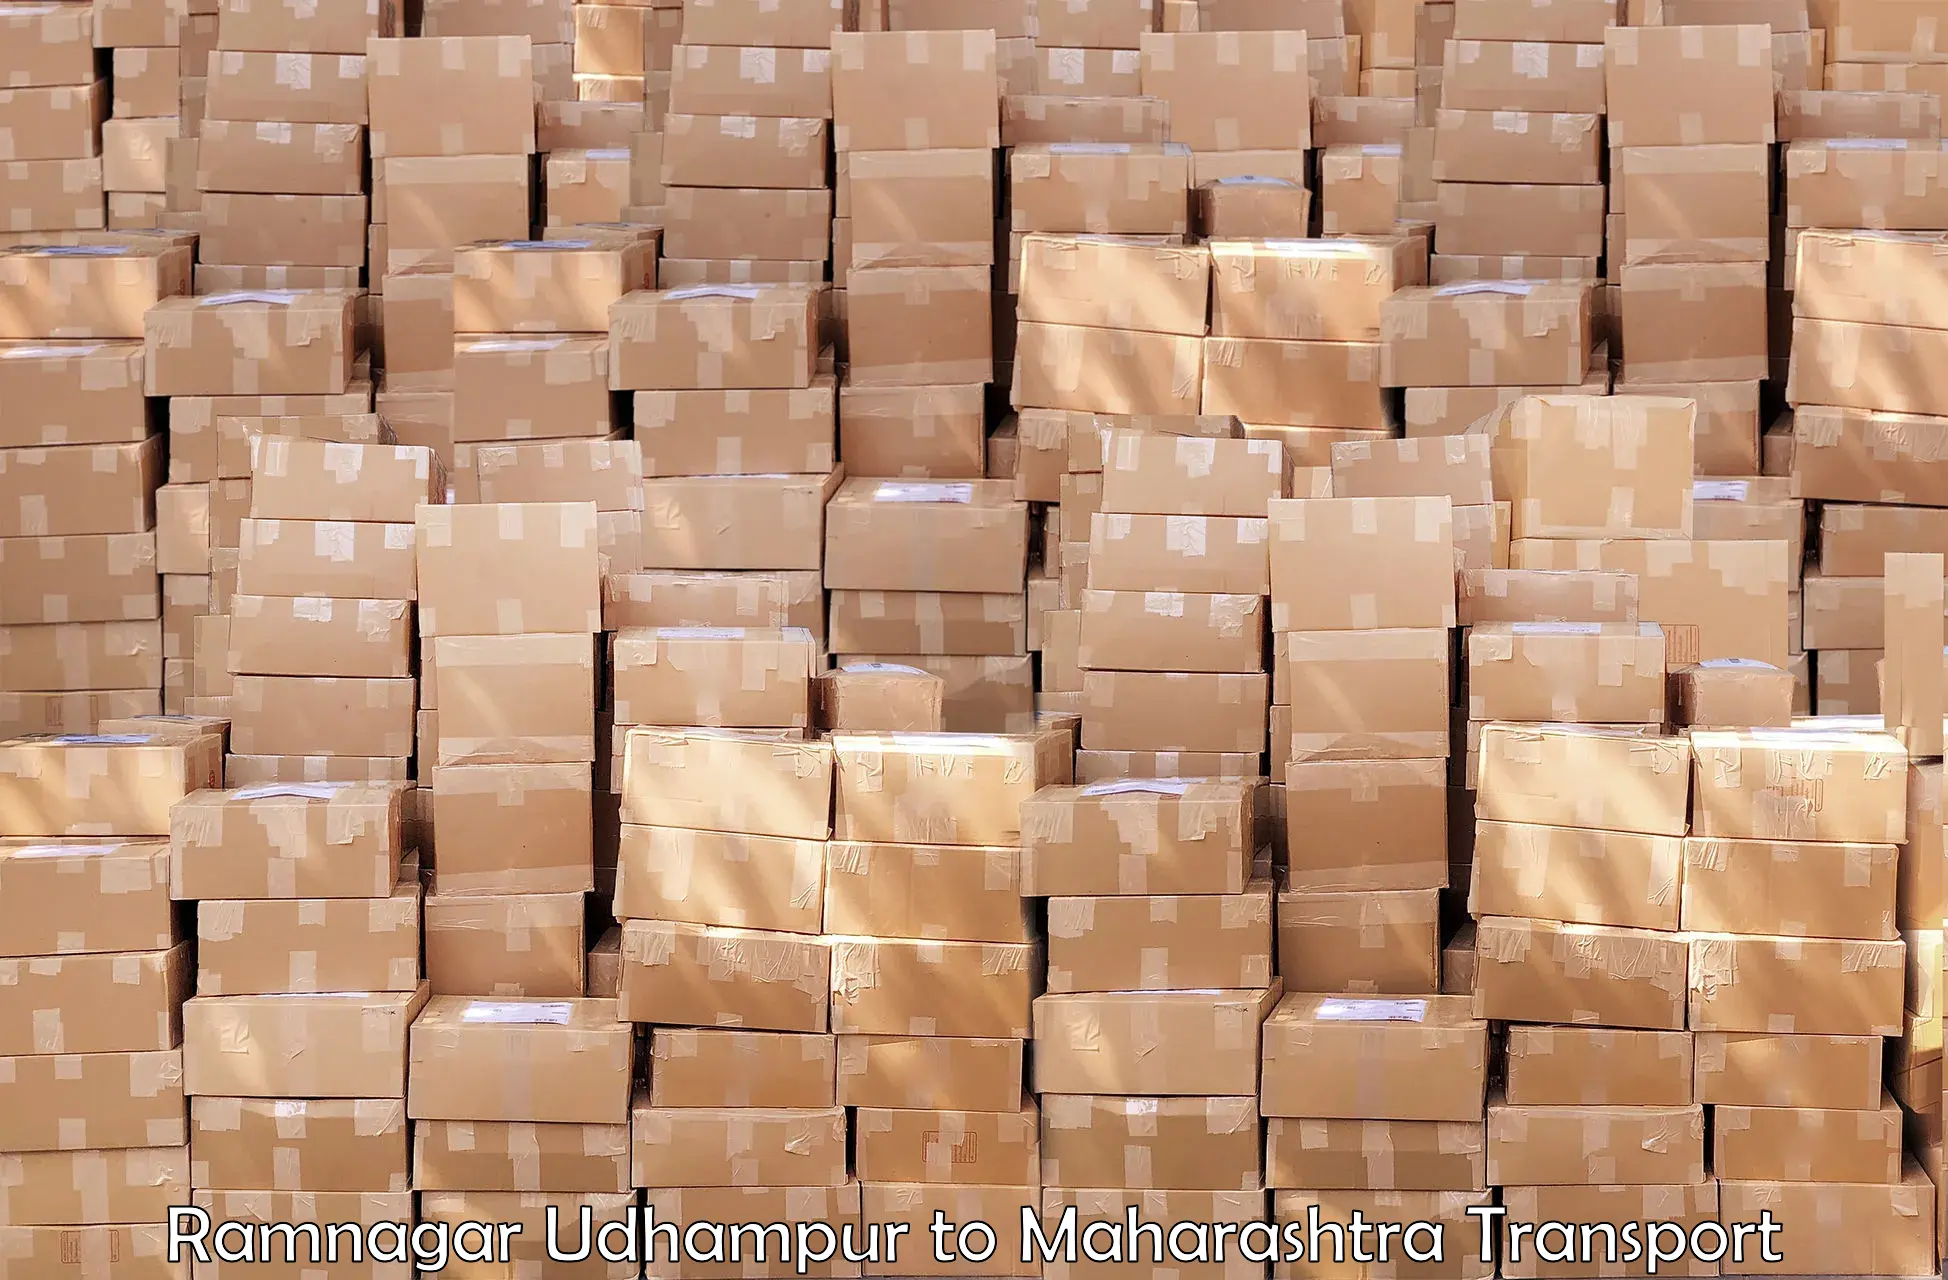 Material transport services in Ramnagar Udhampur to Nagpur